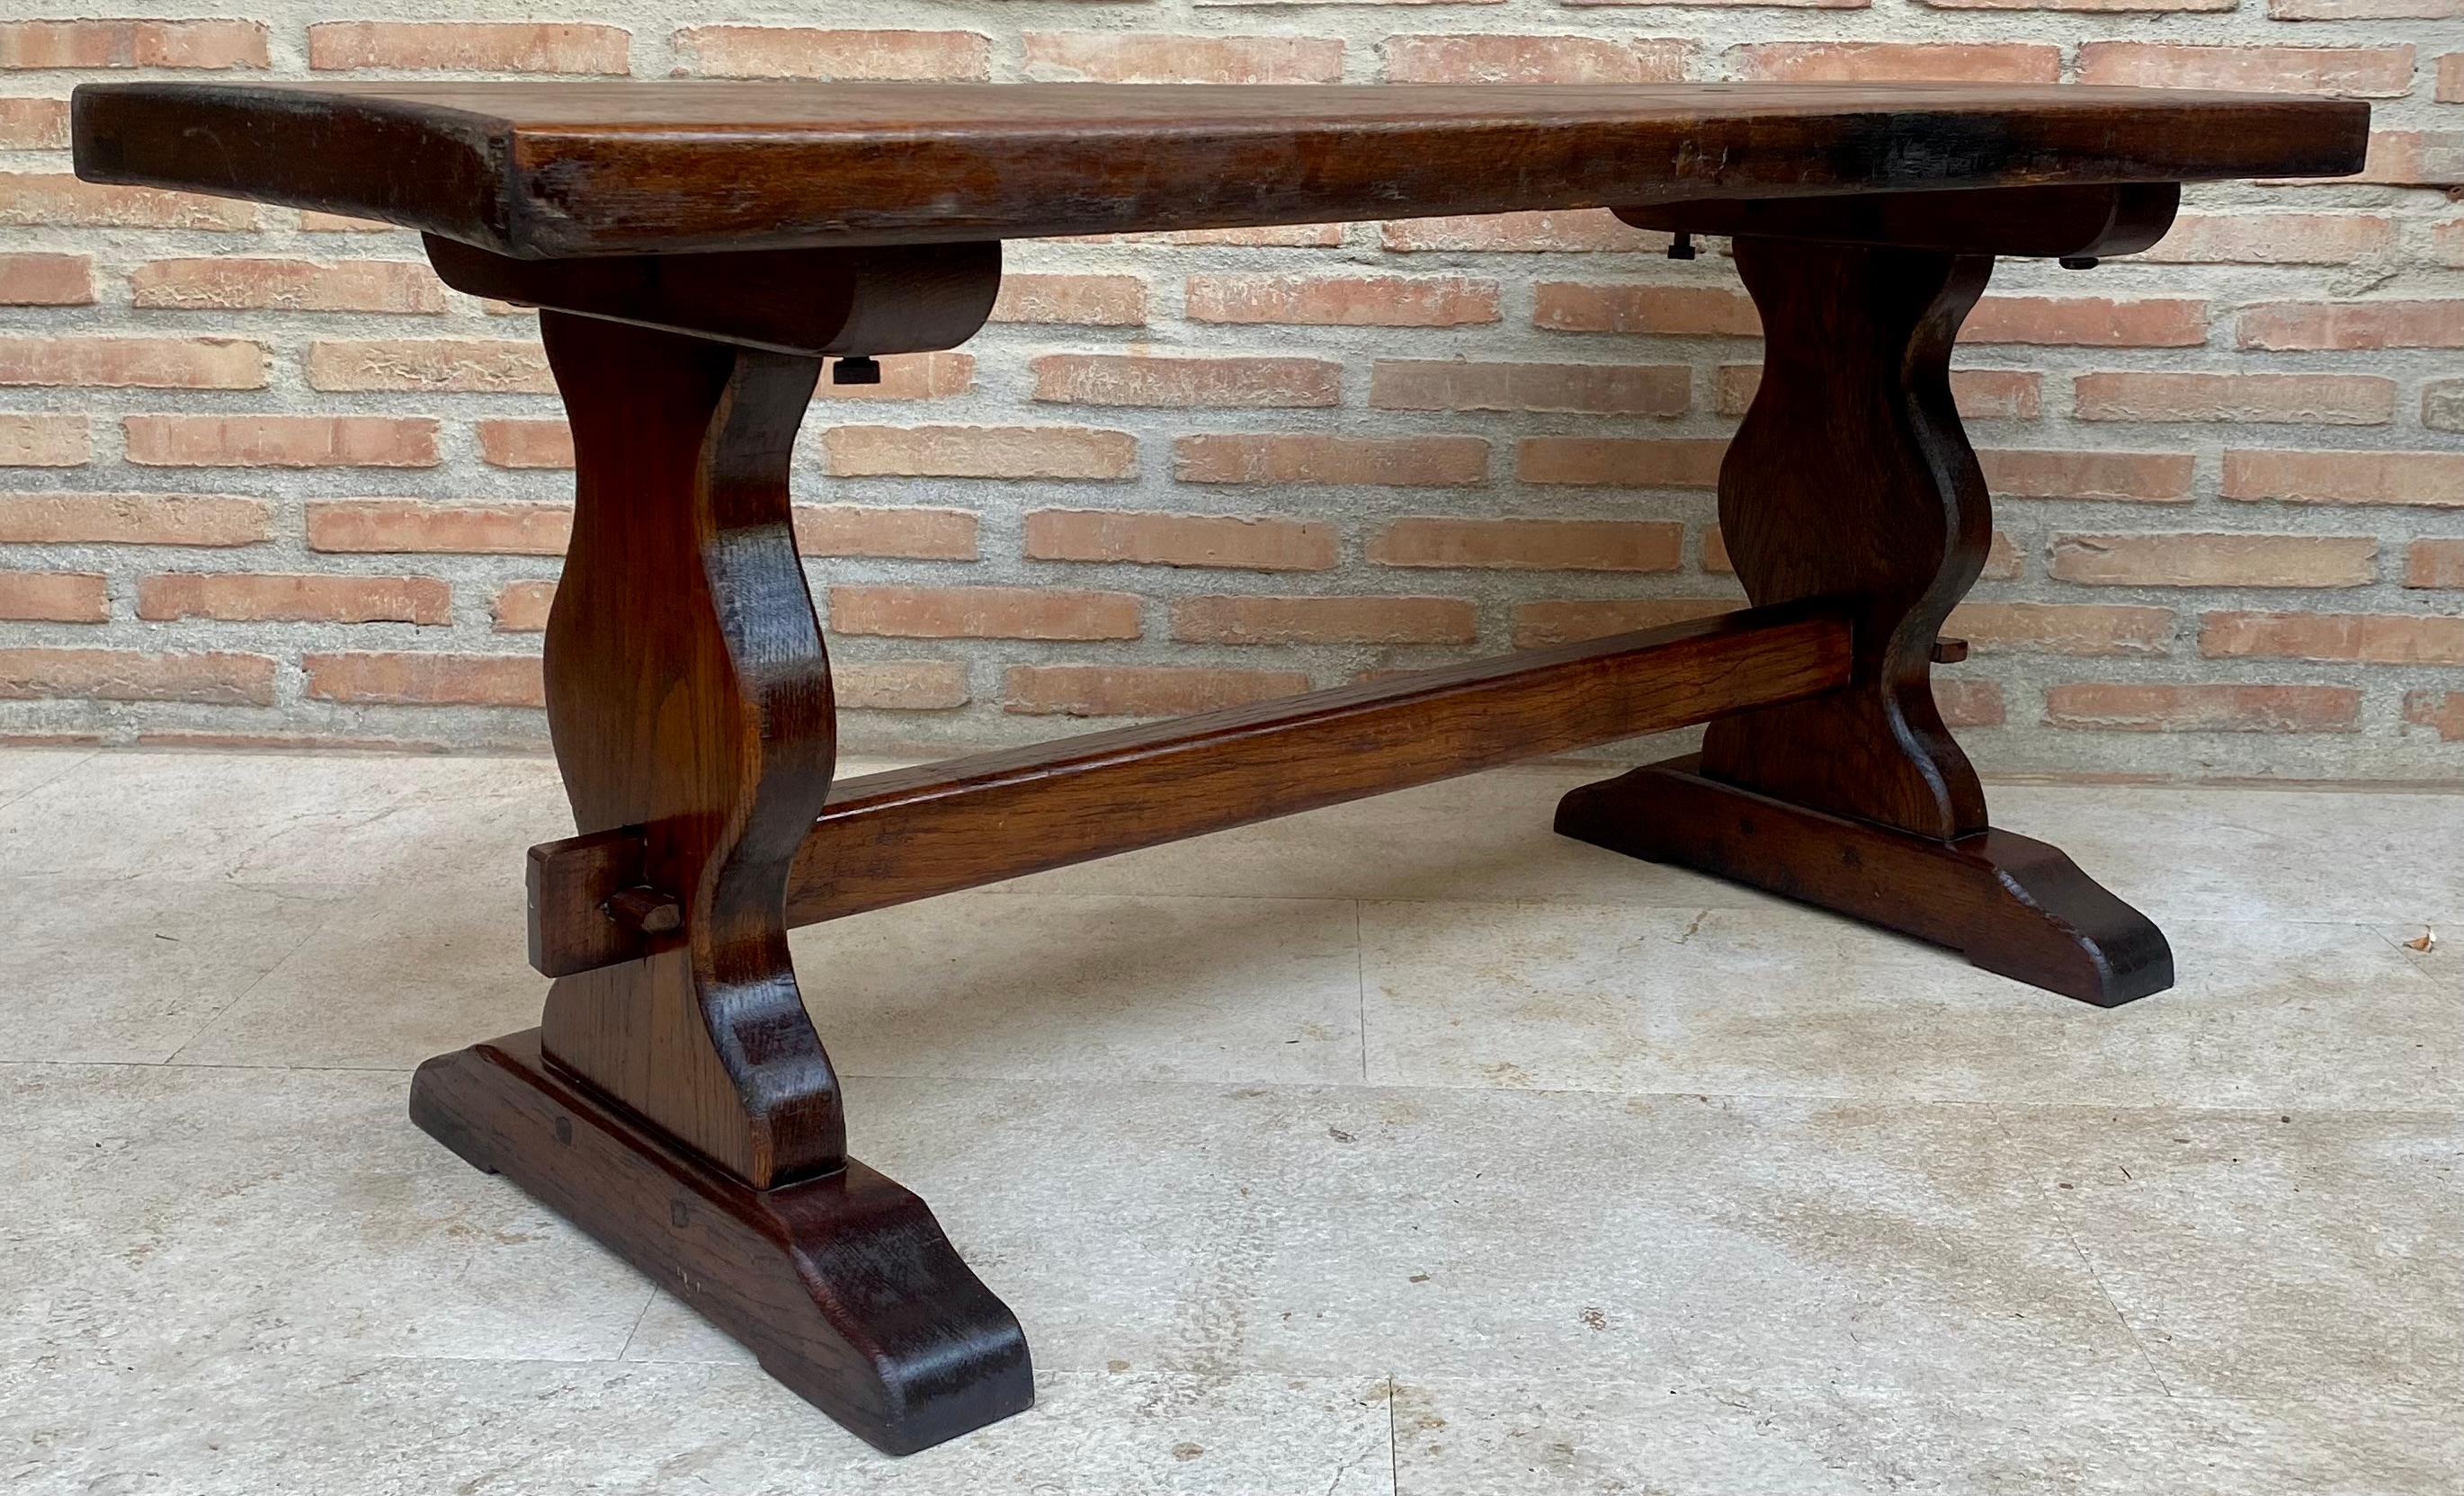 
Spanish colonial narrow console table.
This piece has legs with two pedestals joined by a wooden stretcher.